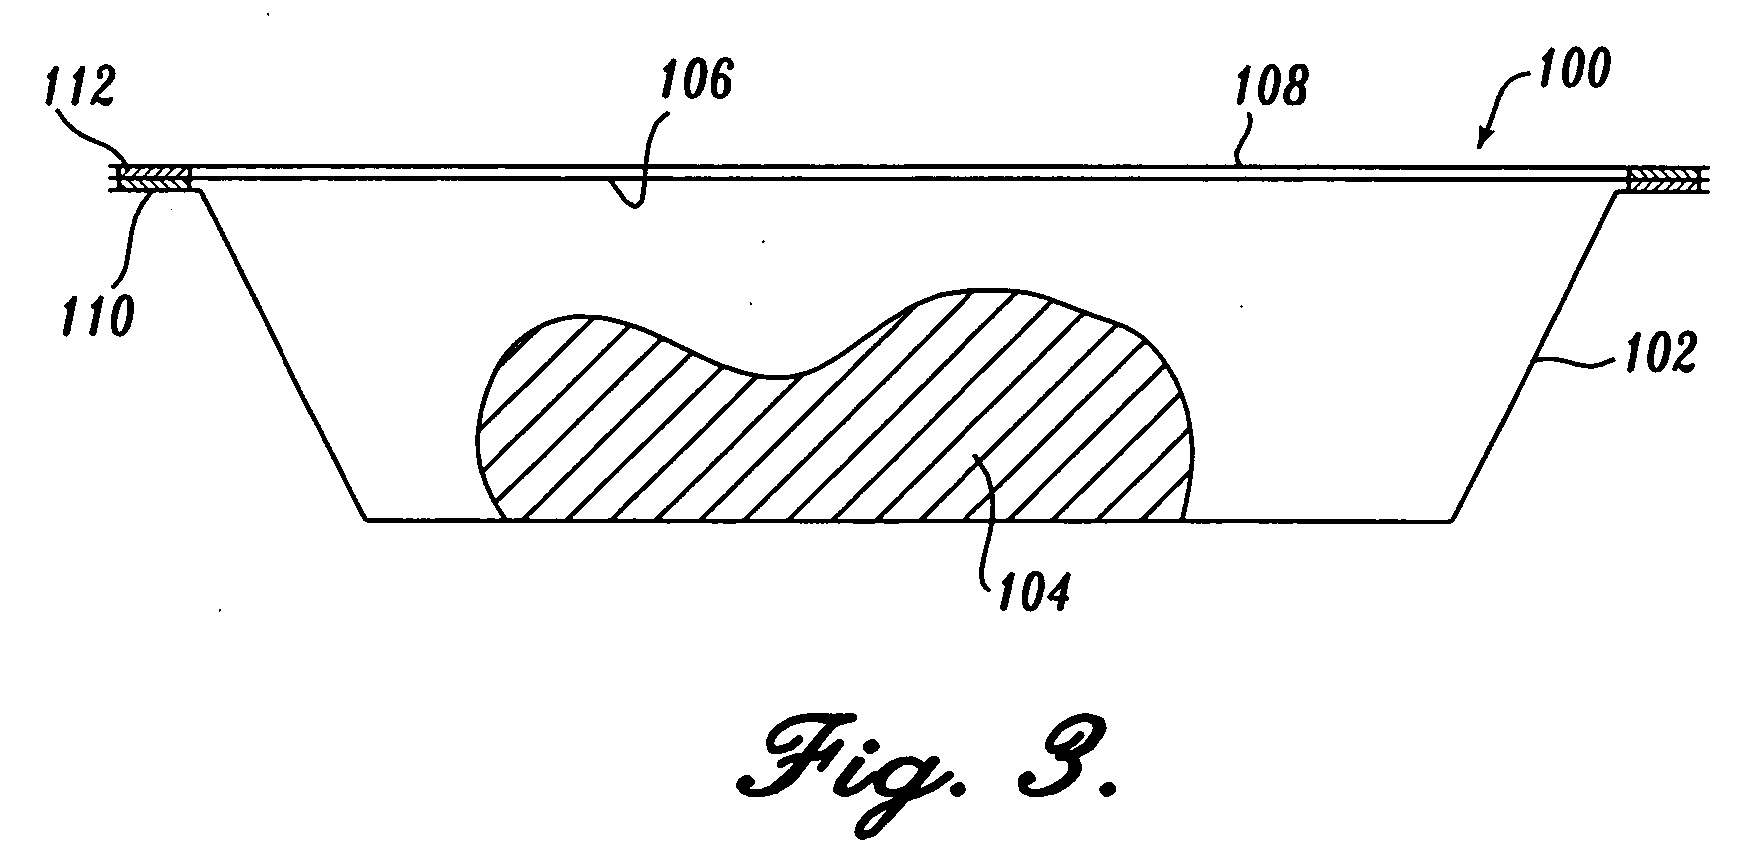 Products, methods and apparatus for fresh meat processing and packaging